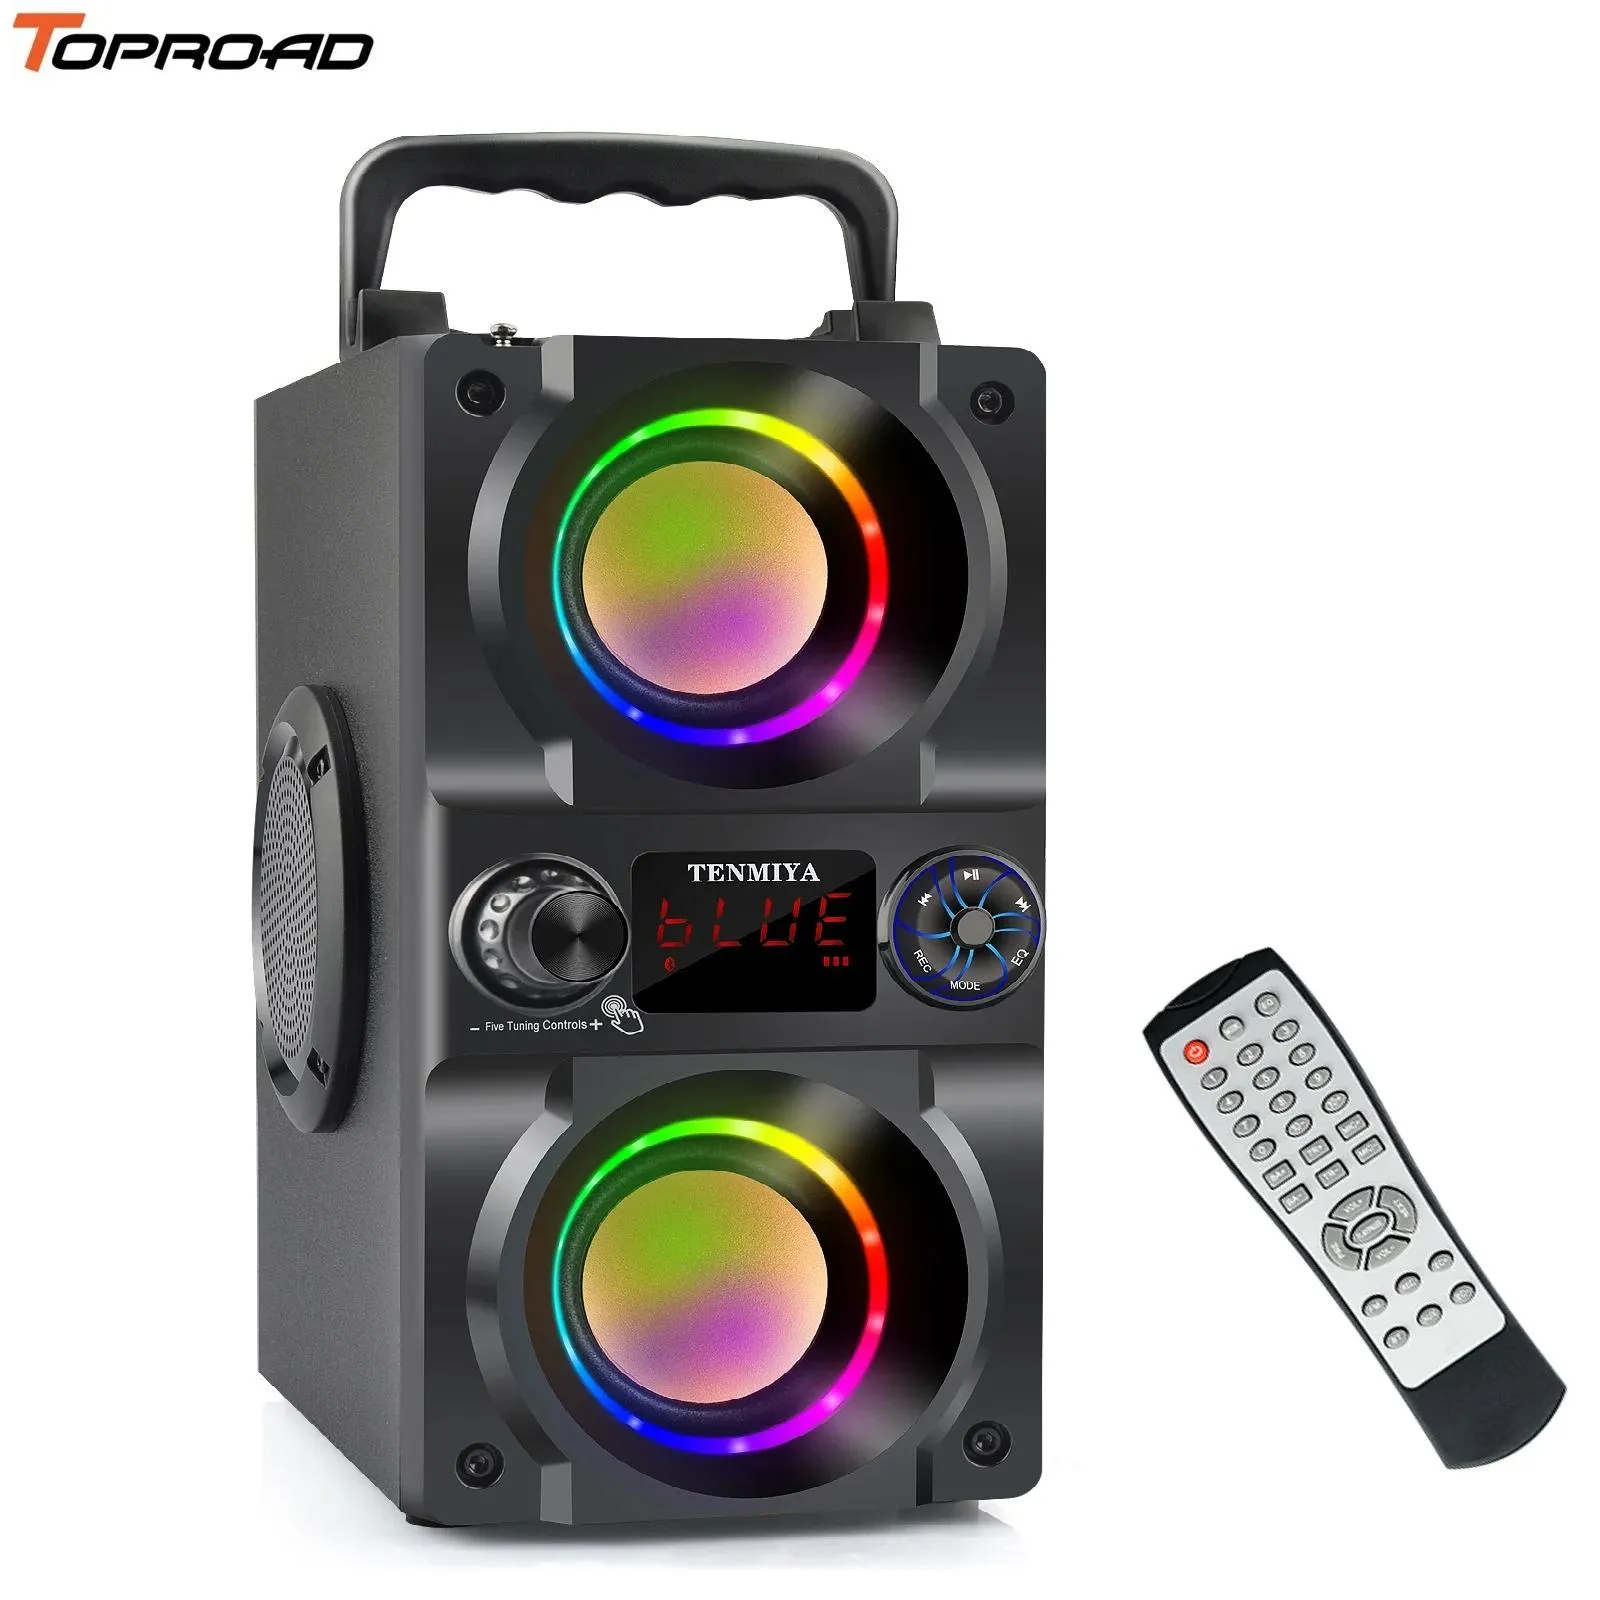 Speakers TOPROAD 40W Bluetooth Speaker Portable Wireless Boombox Bass Subwoofer Speakers Support Remote Control FM Radio RGB LED Lights